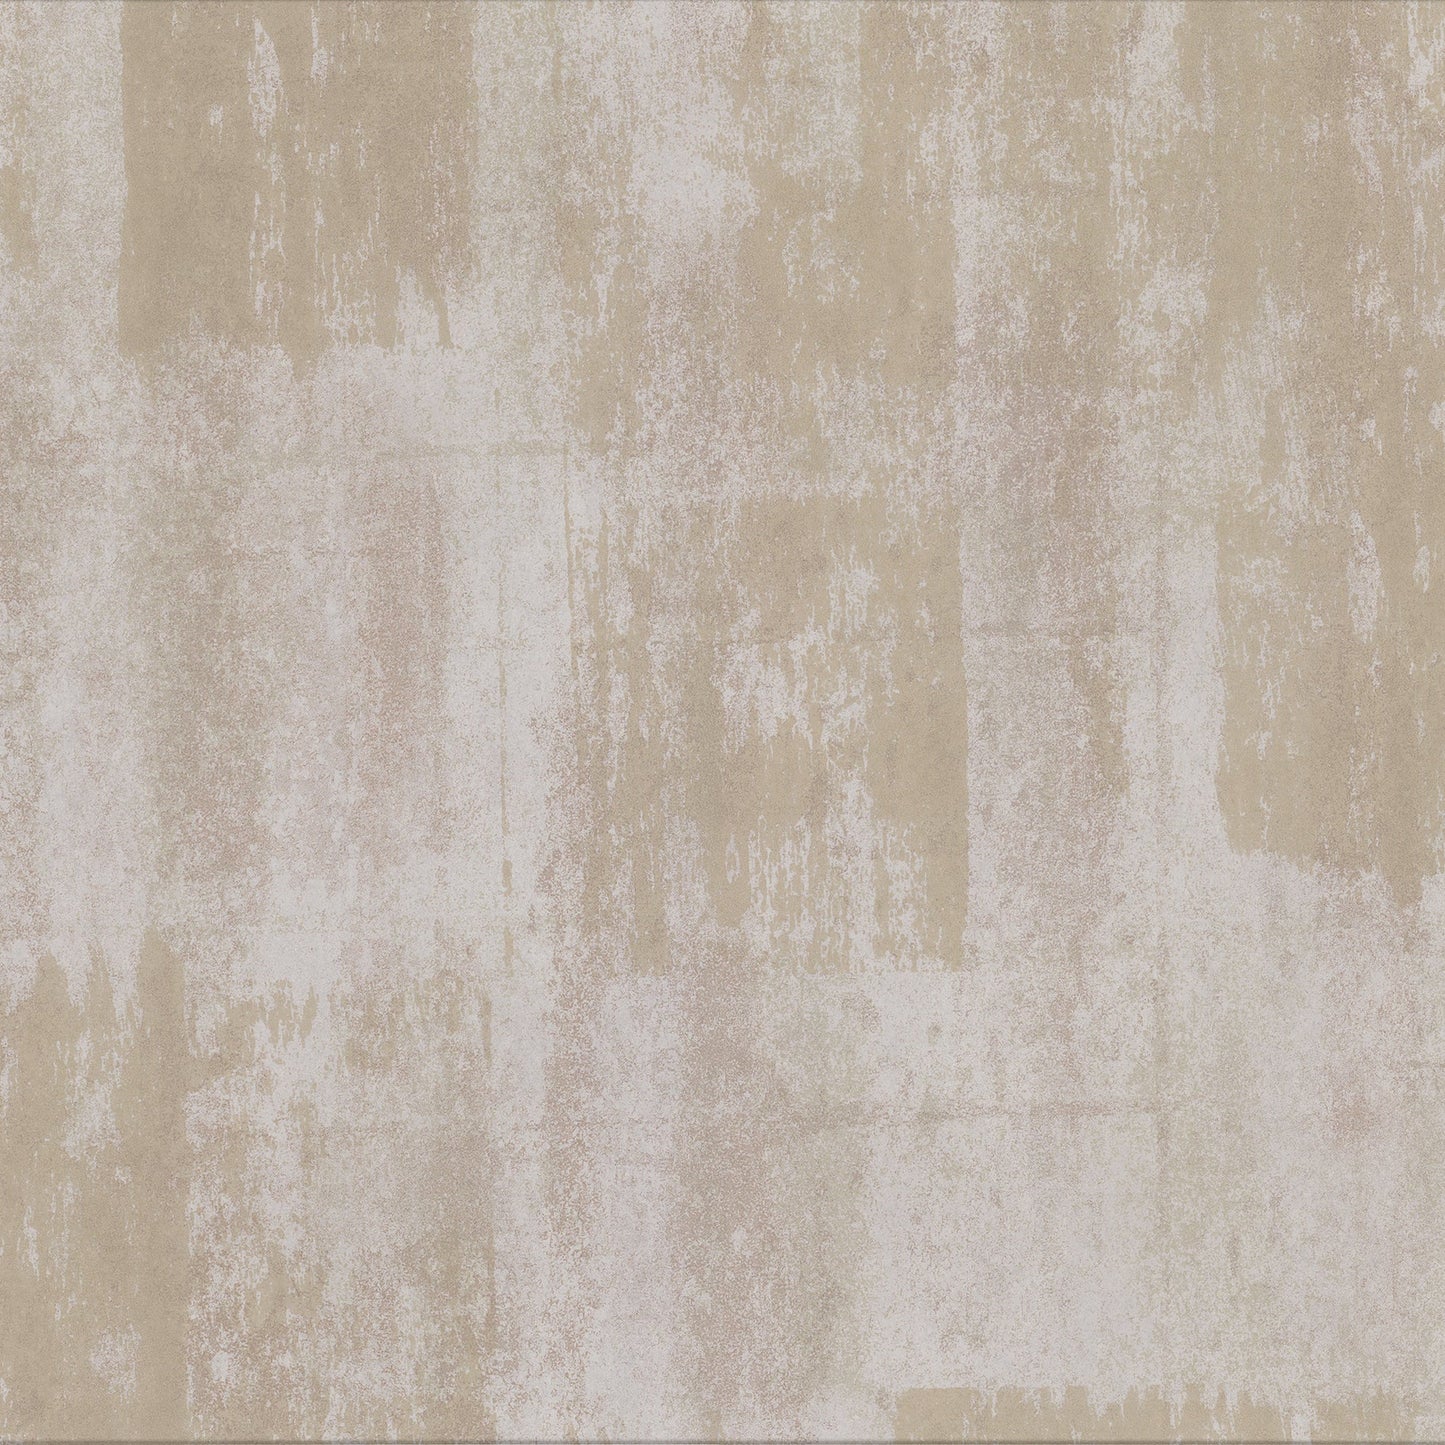 Looking 2909-MLC-122 Riva Pollit Champagne Distressed Texture Brewster Wallpaper